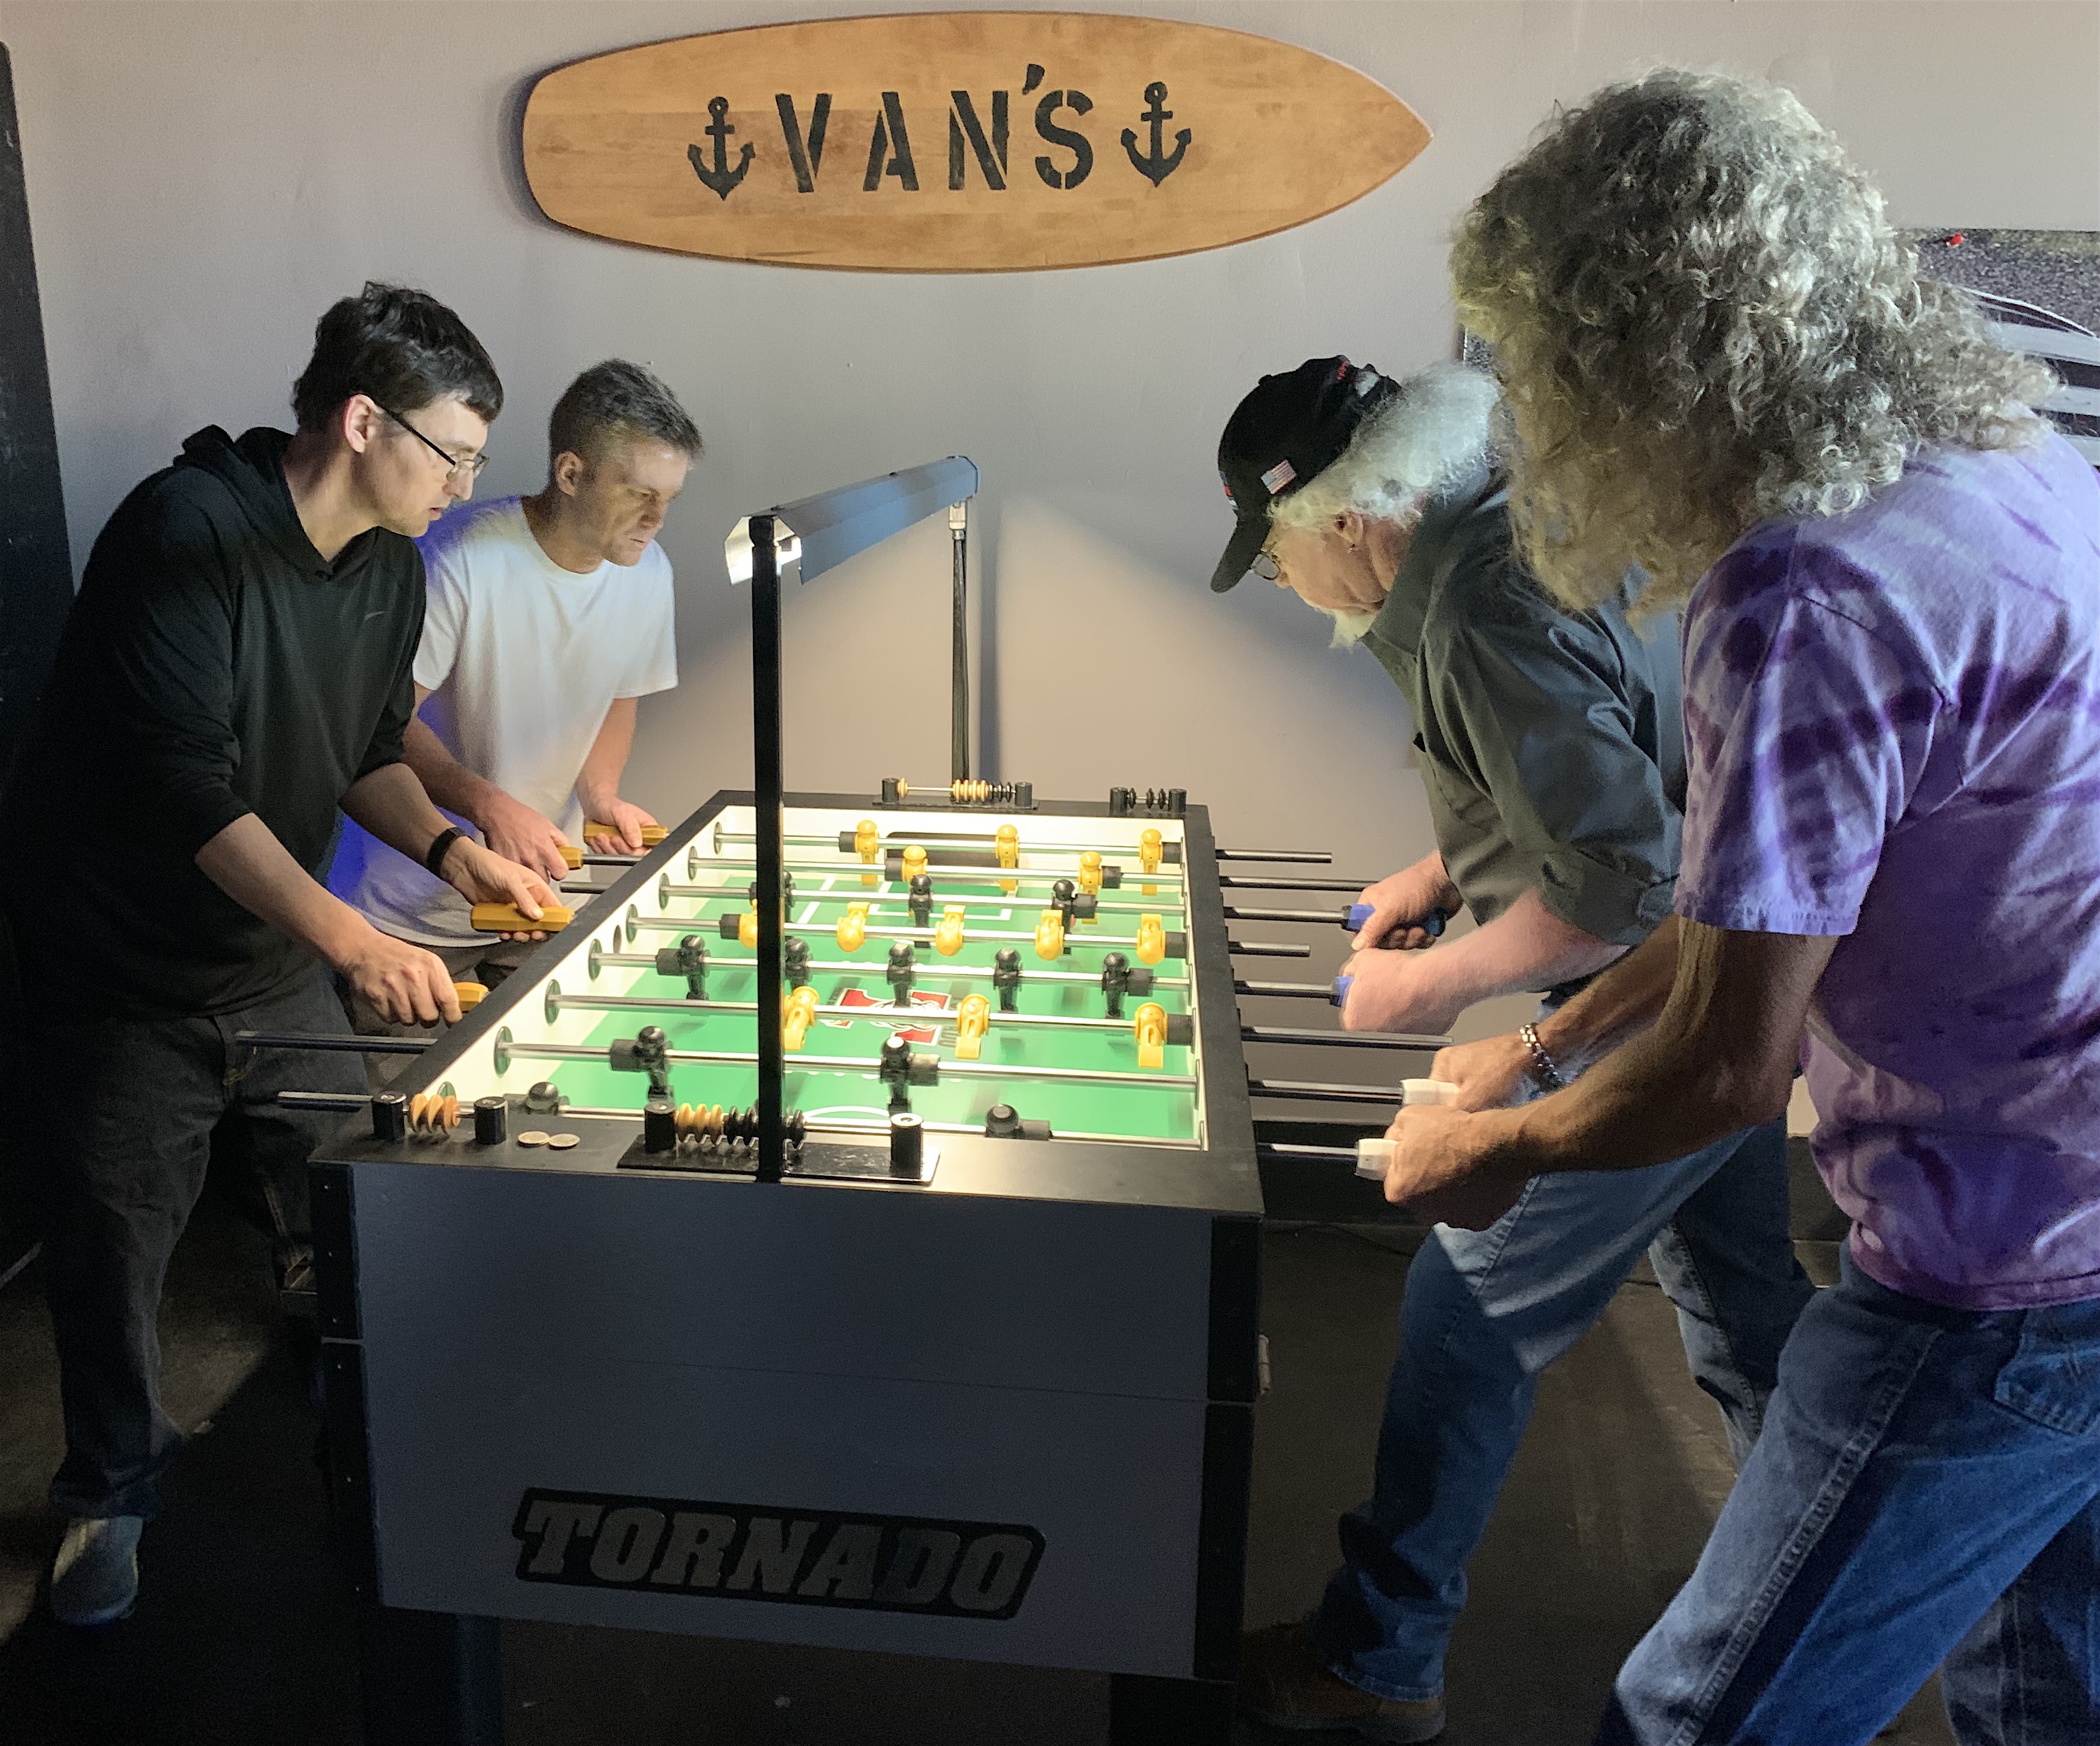 Shown is Ala-Amateur Foosball tournament action at Vans Bar in Leeds, players competing for the title are David Marler & Josh Monroe vs. Paul Gulledge & Andy Gulledge.